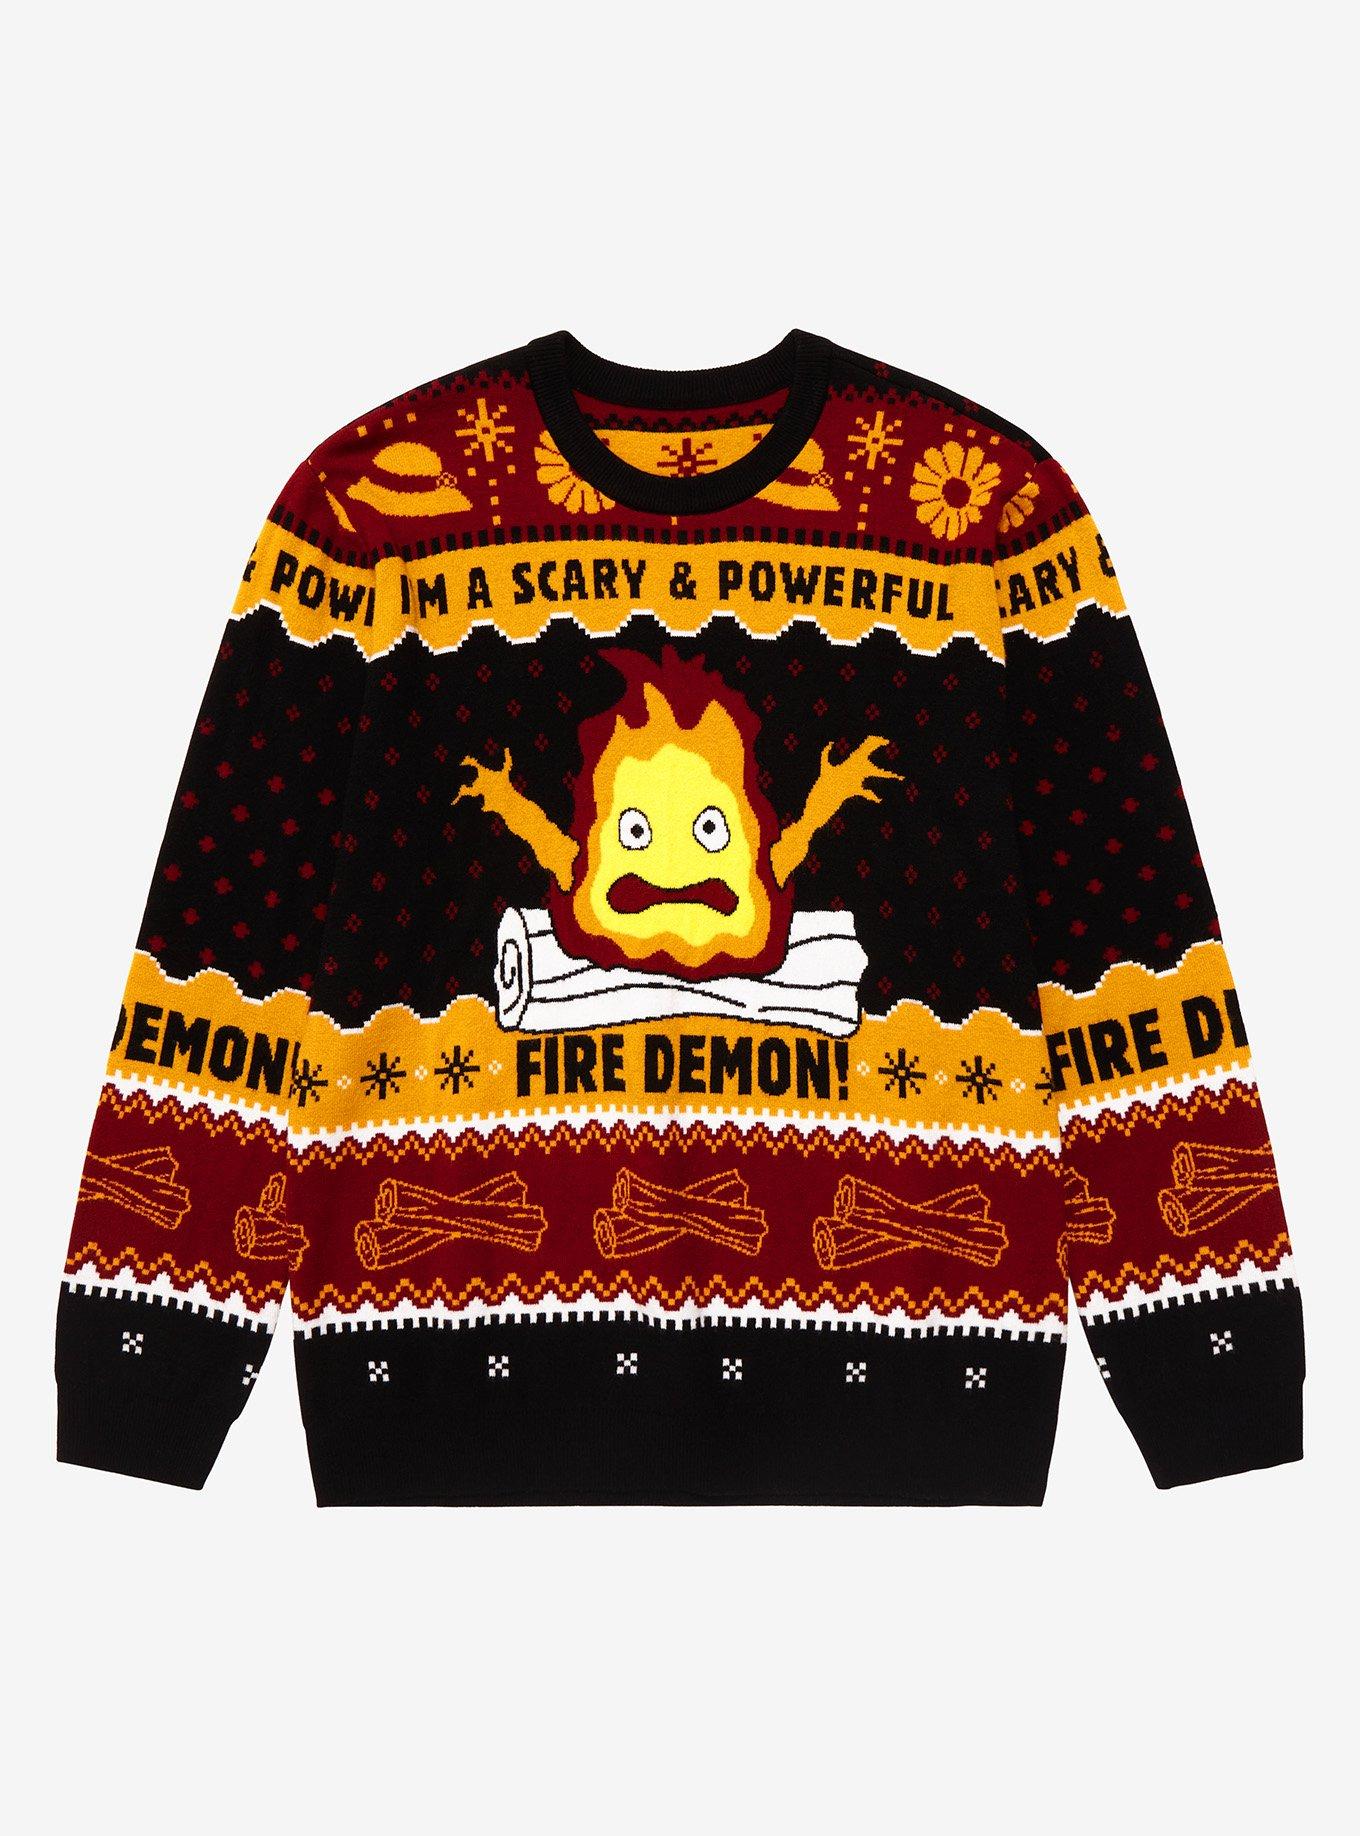 Studio Ghibli Howl's Moving Castle Calcifer Scary & Powerful Holiday Sweater - BoxLunch Exclusive